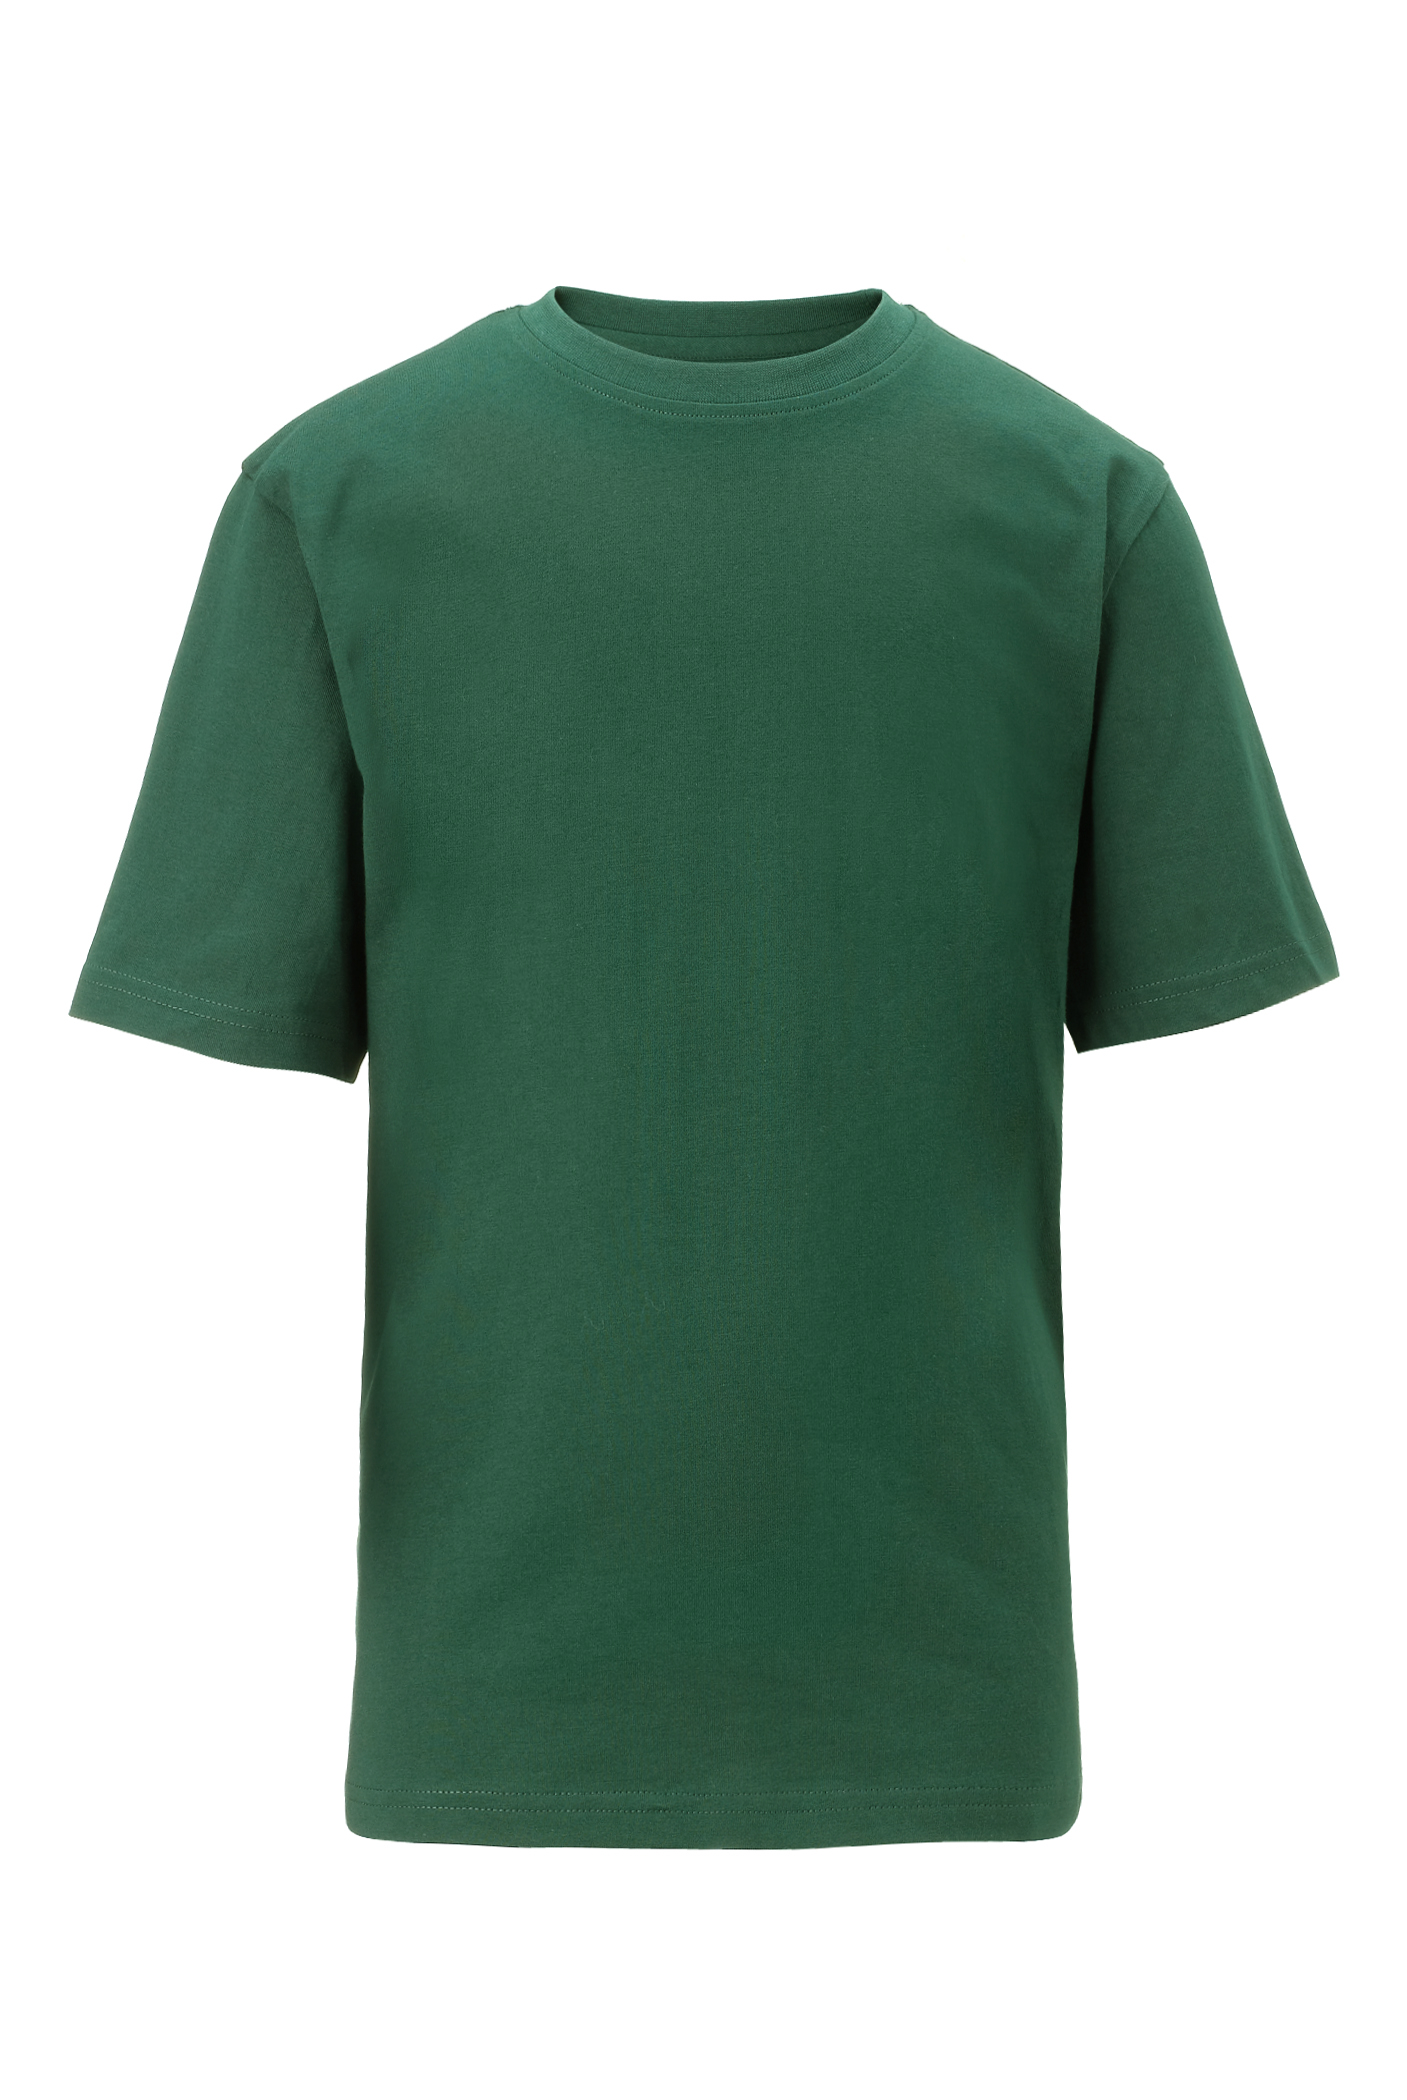 2 Pack Bottle Green Cotton T-Shirts